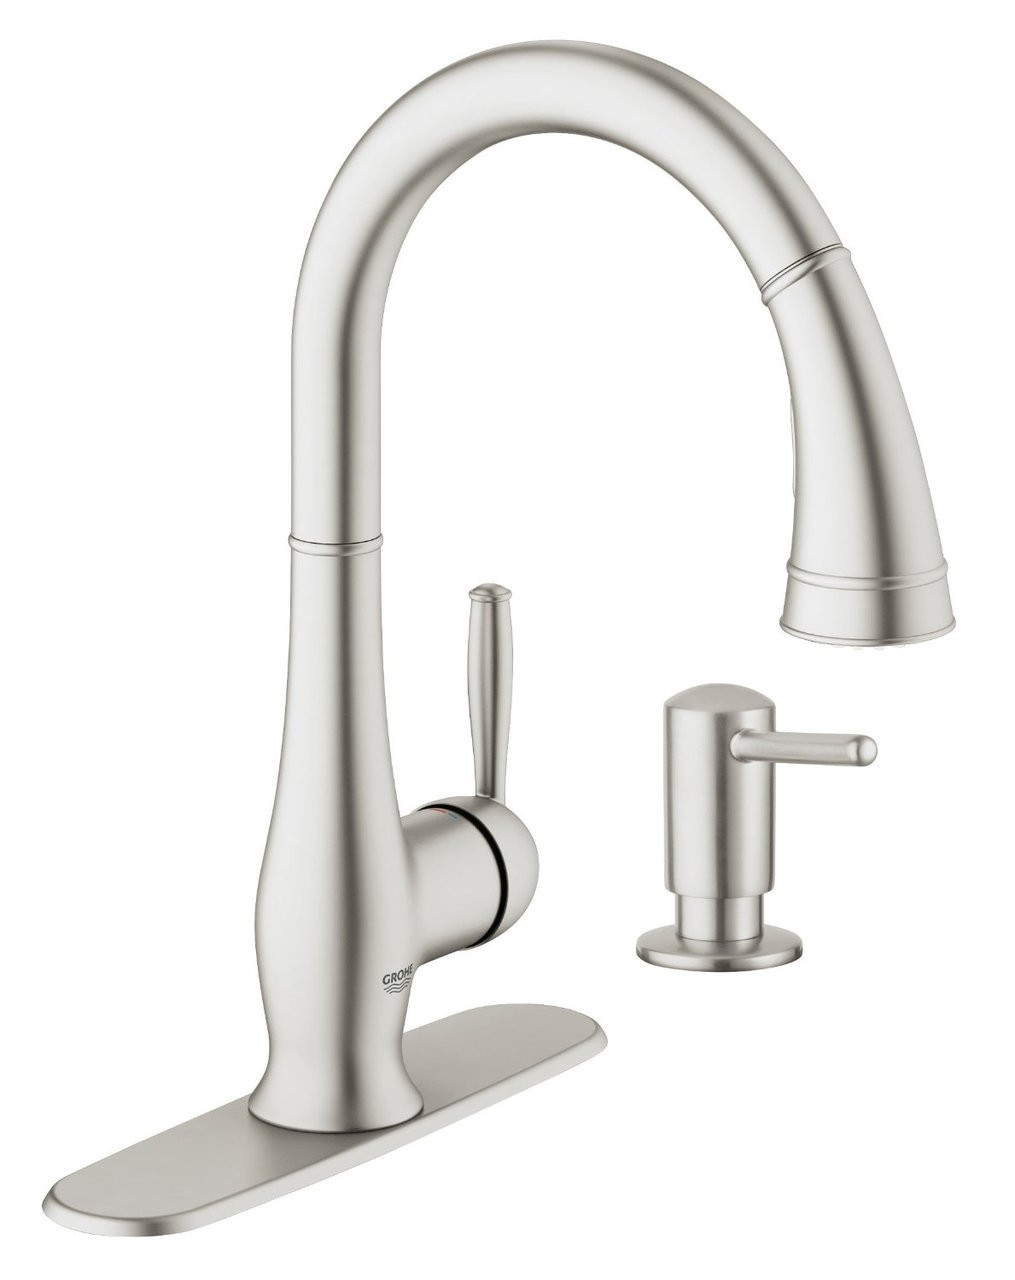 Grohe Wexford Single Lever Sink Mixer 1 2 And Soap Dispenser Combo Royal Bath Place